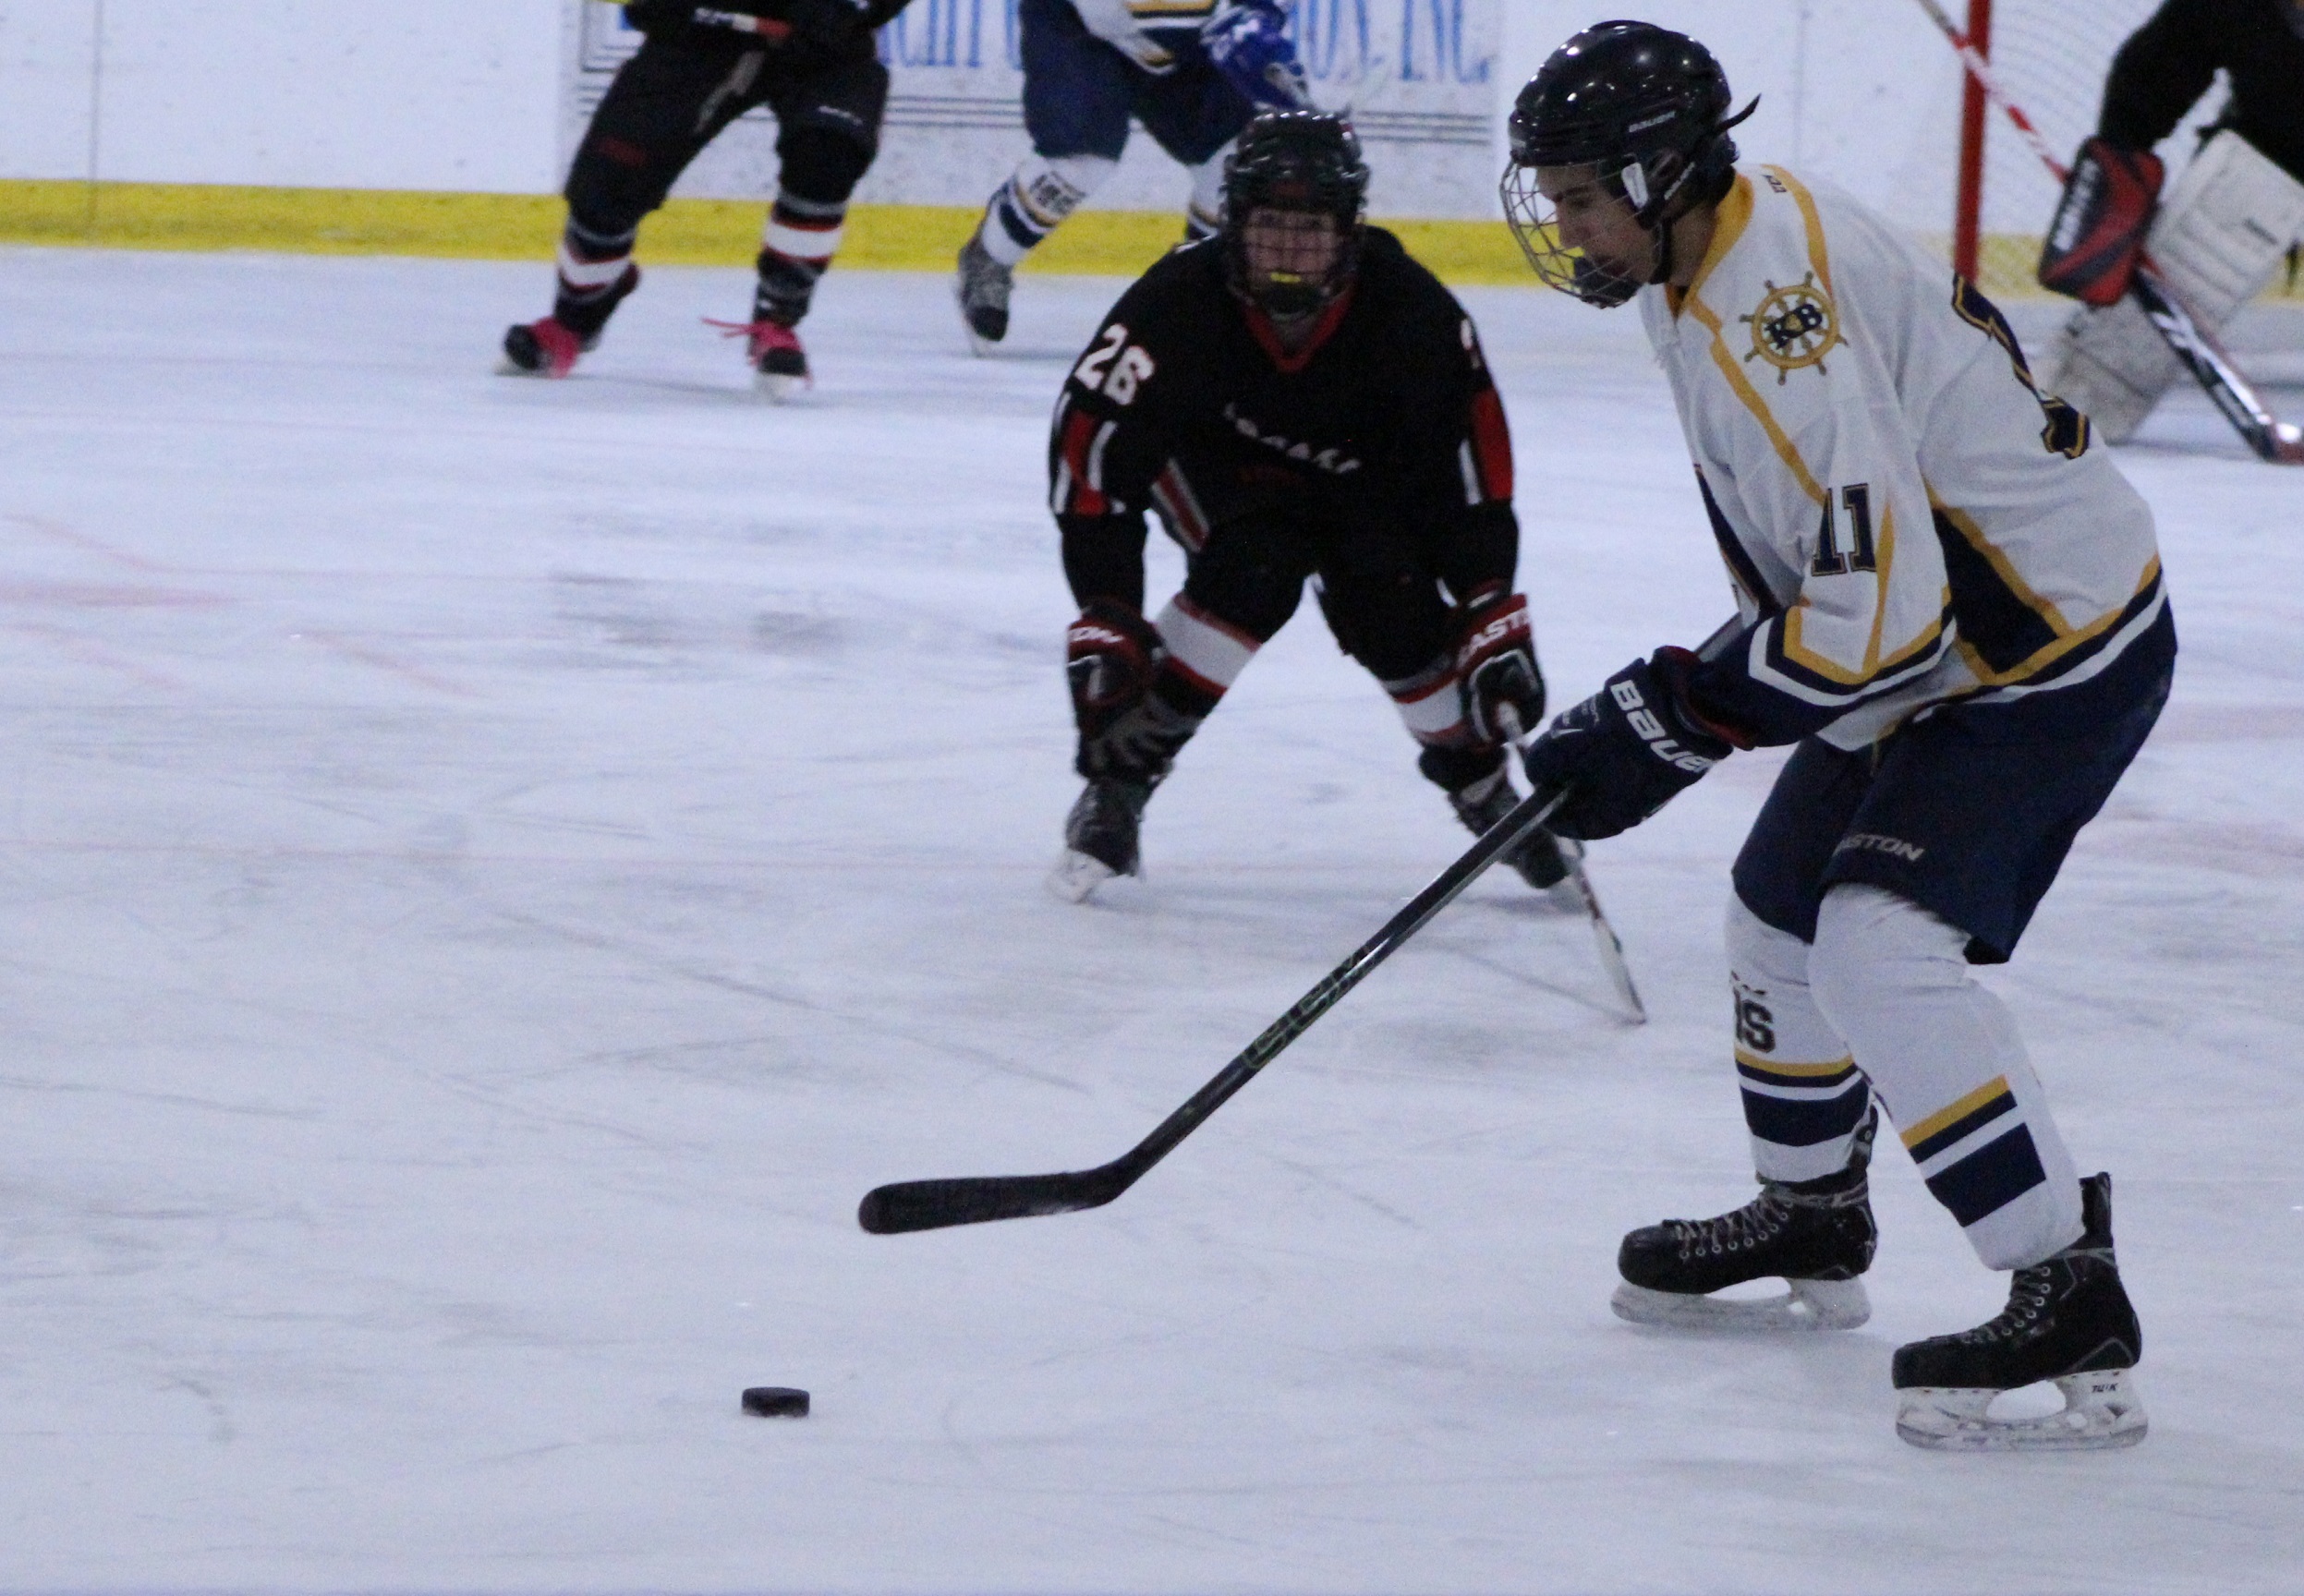 Mariner Charlie Menke sweeps in to take the puck away from a Houston player during their game on Thursday, Nov. 17 at the End of the Road Shootout at Kevin Bell Arena.-Photo by Anna Frost, Homer News